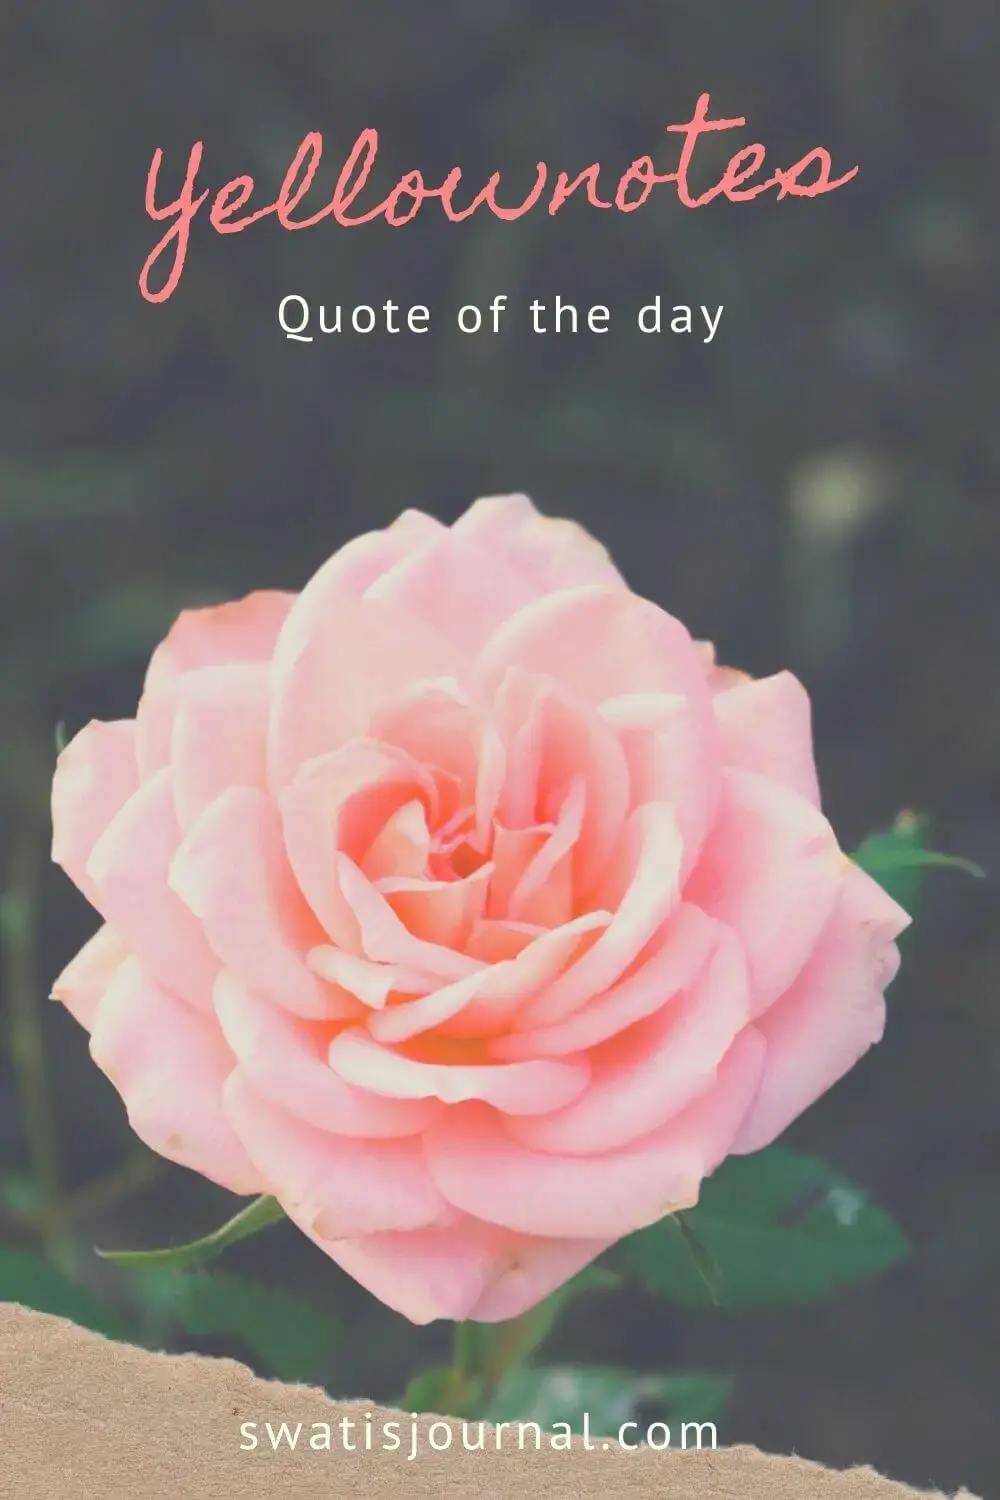 FEBRUARY 2020 - DAILY QUOTES - YELLOWNOTES cover image